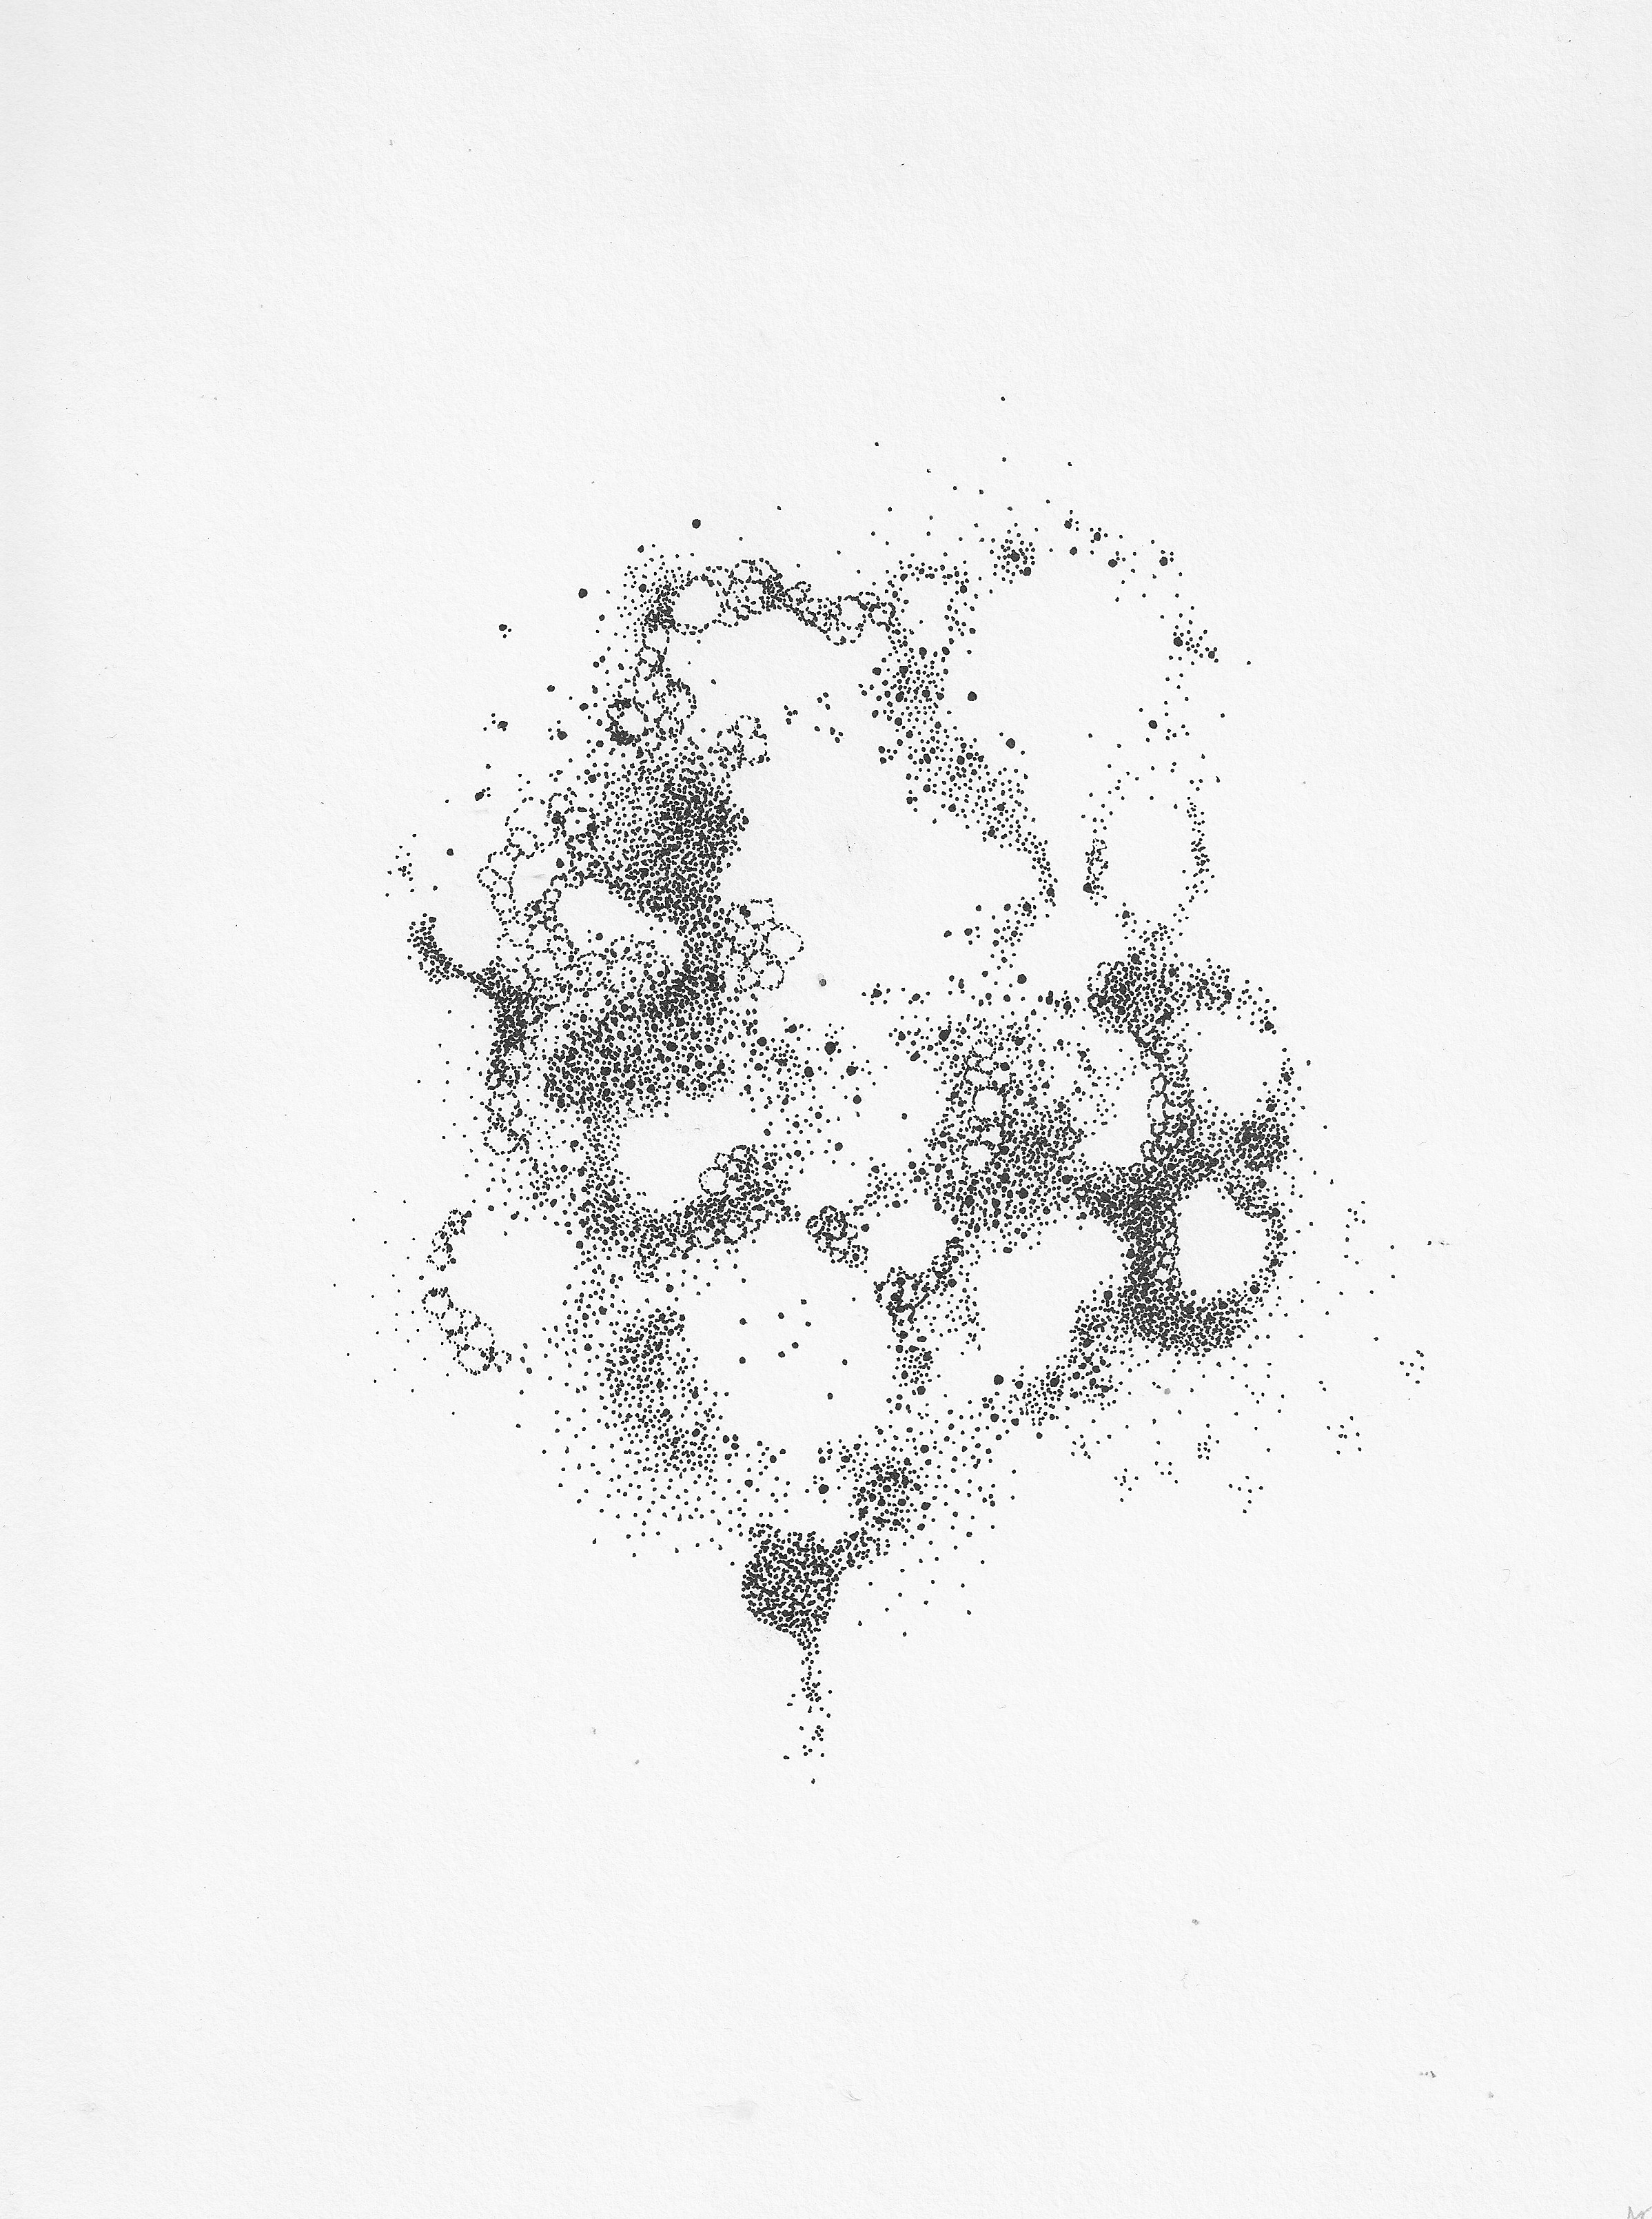  untitled (dot3), ink on paper, 8 x 10 in. 